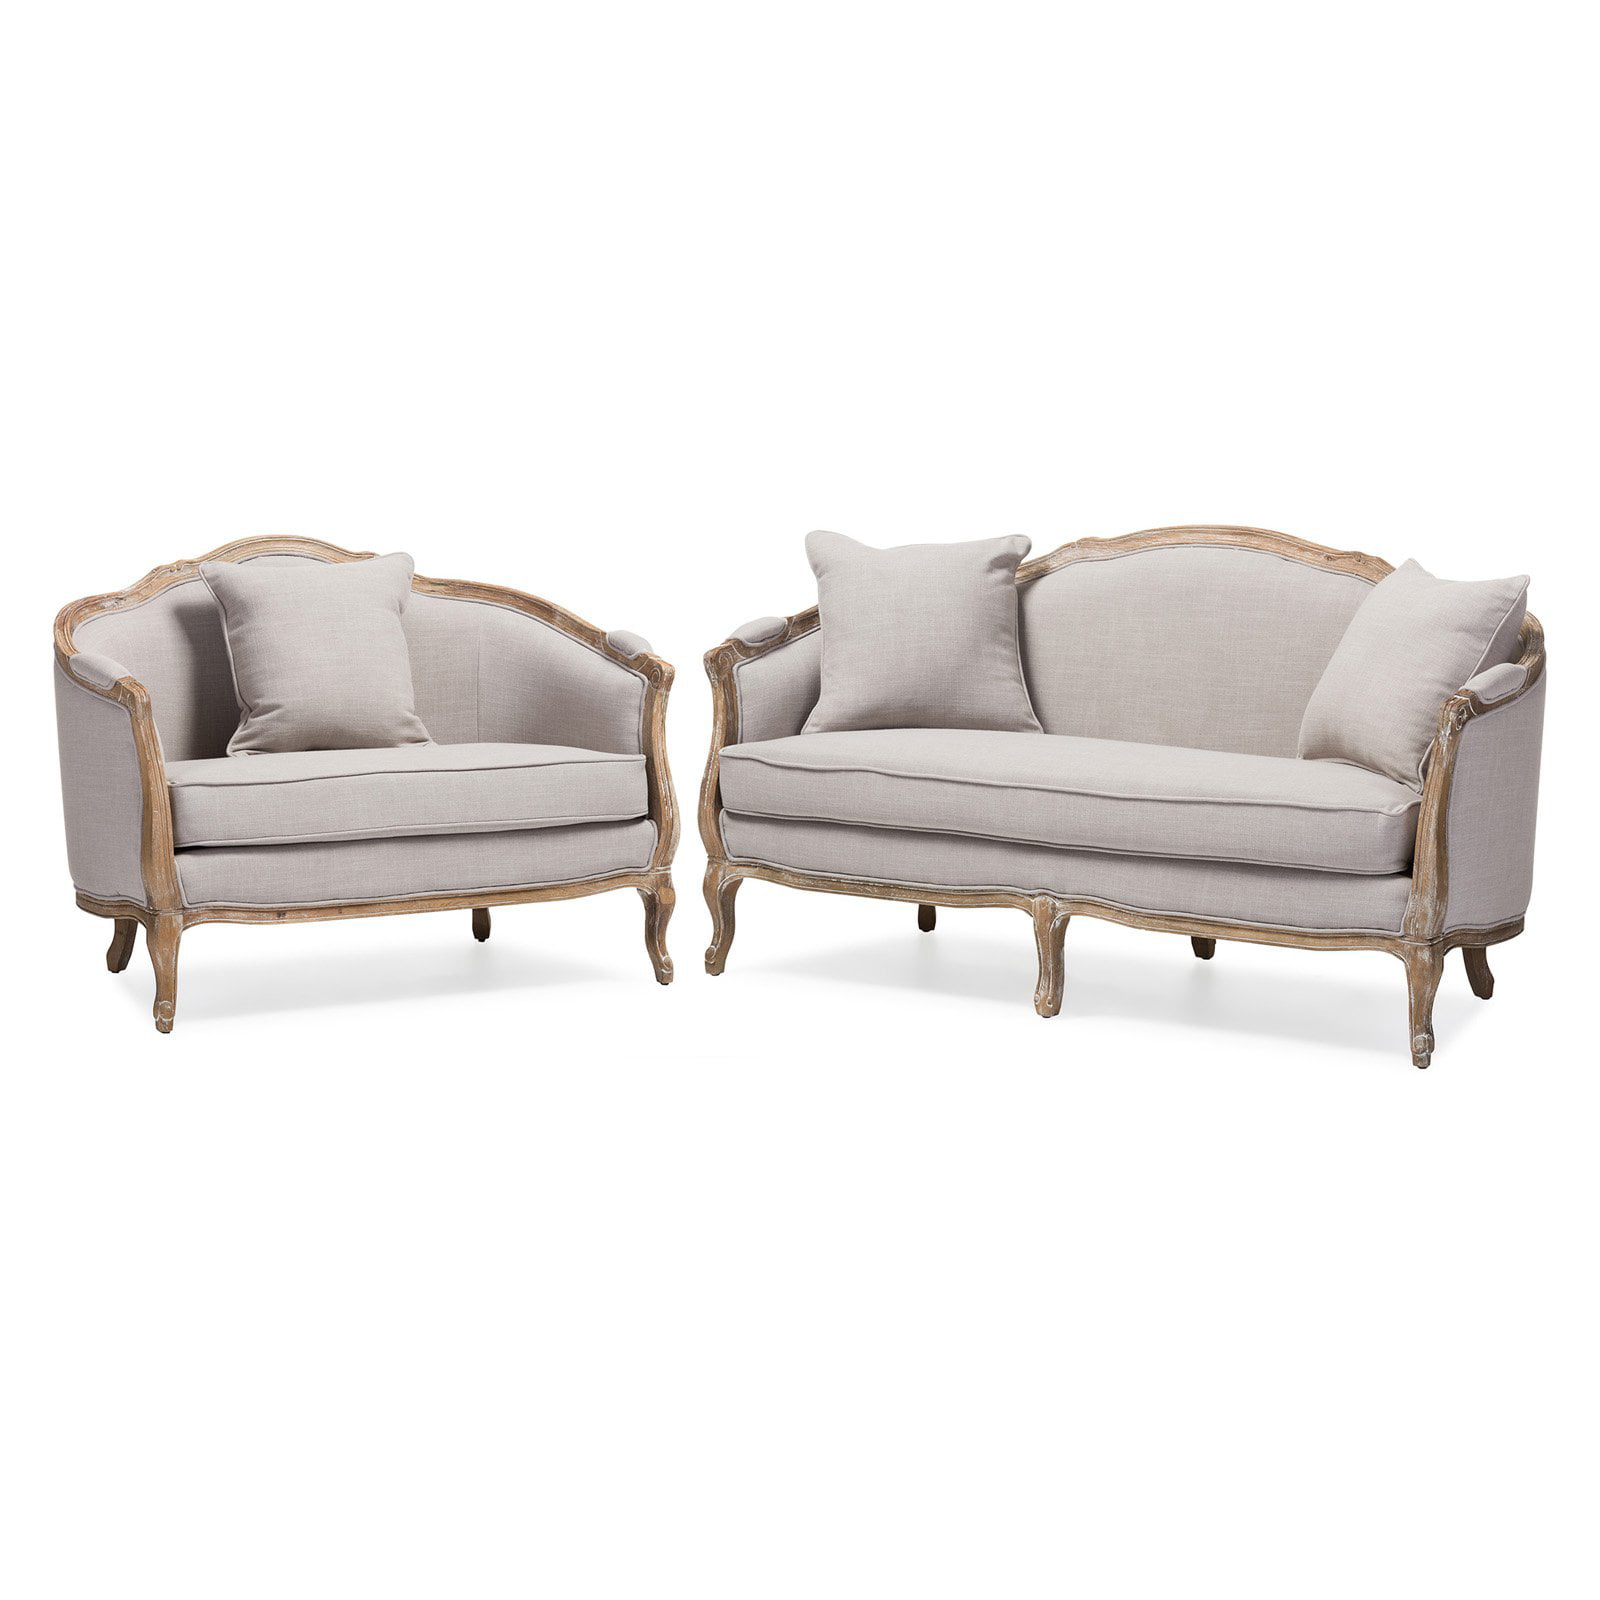 Baxton Studio Chantal French Country, Sofa In French Gender